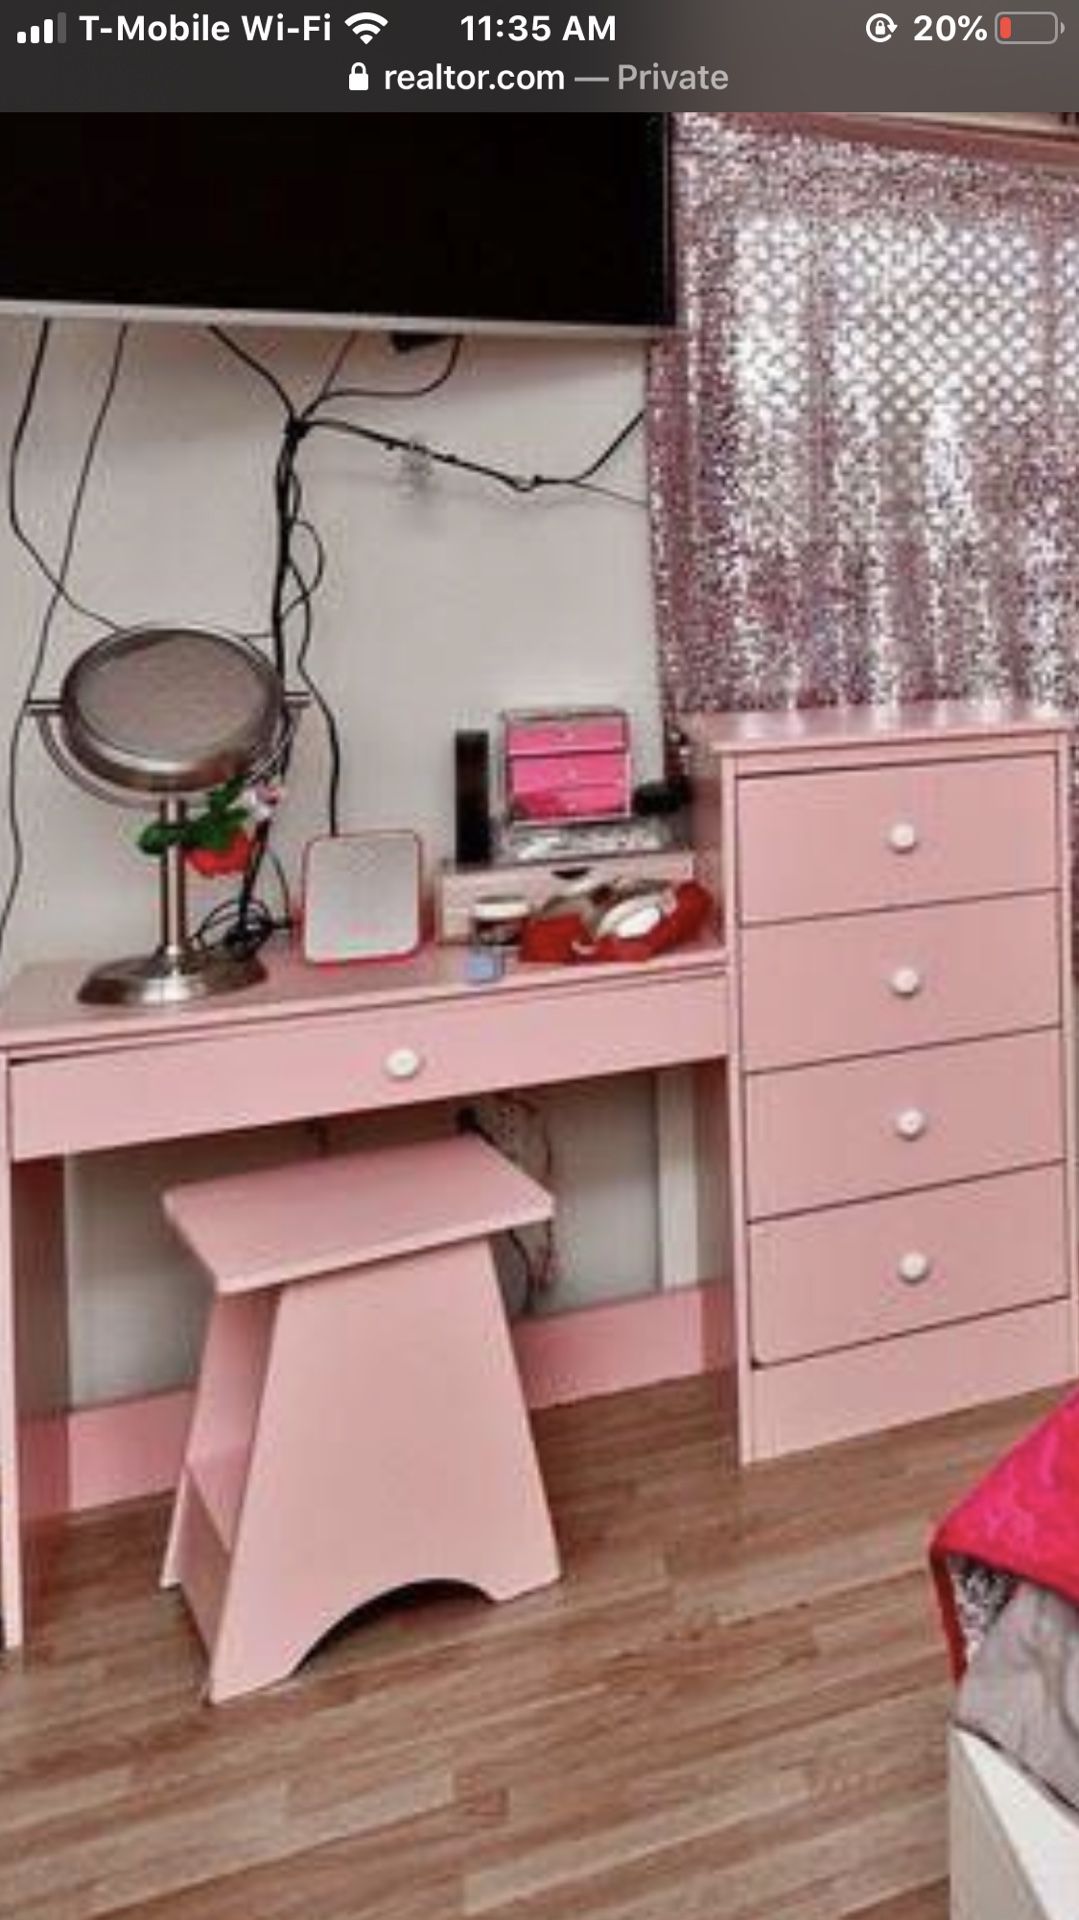 Selling my pink vanity. Need to get rid of it ASAP.